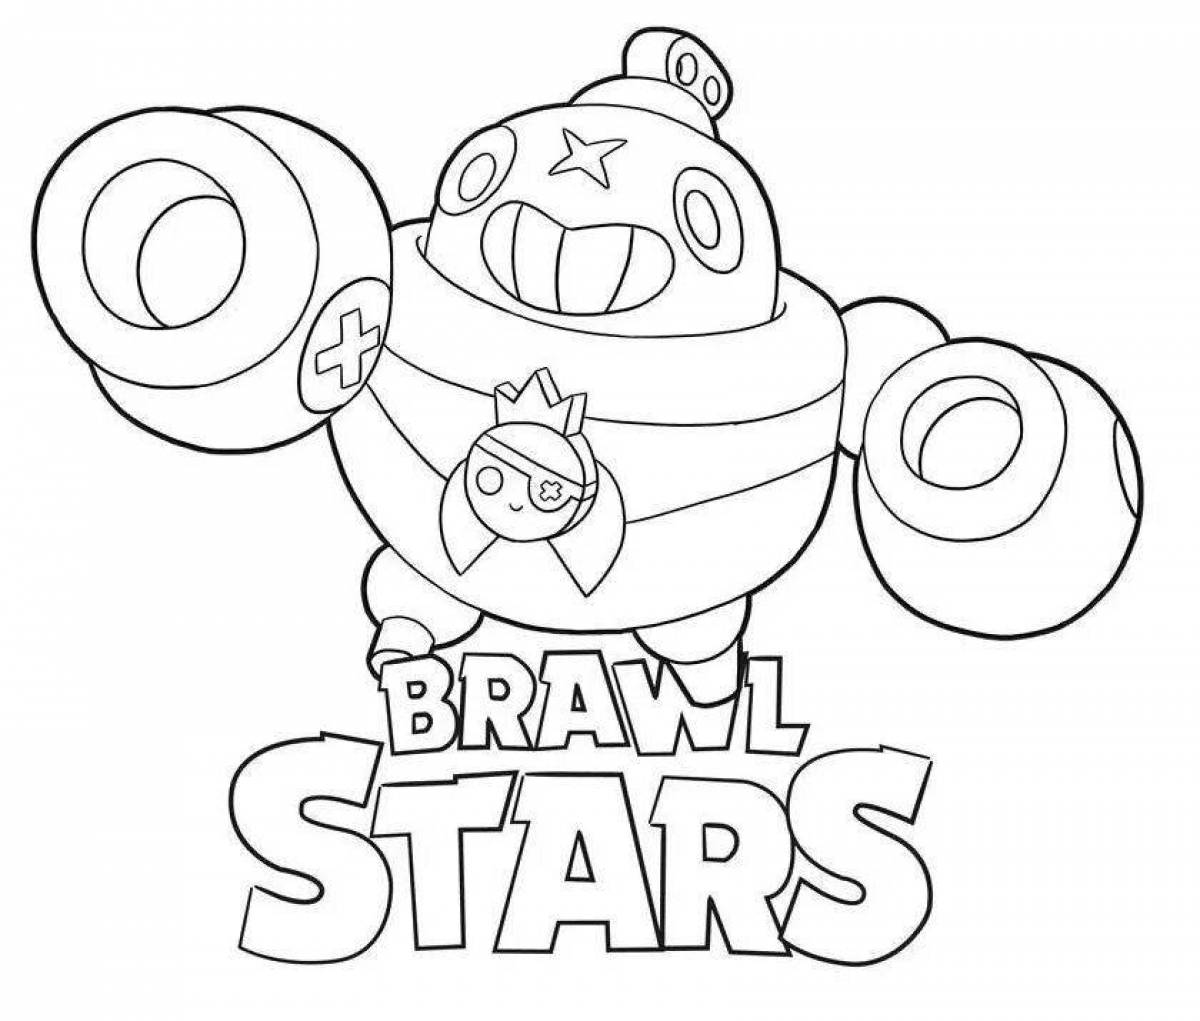 Live squeek coloring page by brawl stars